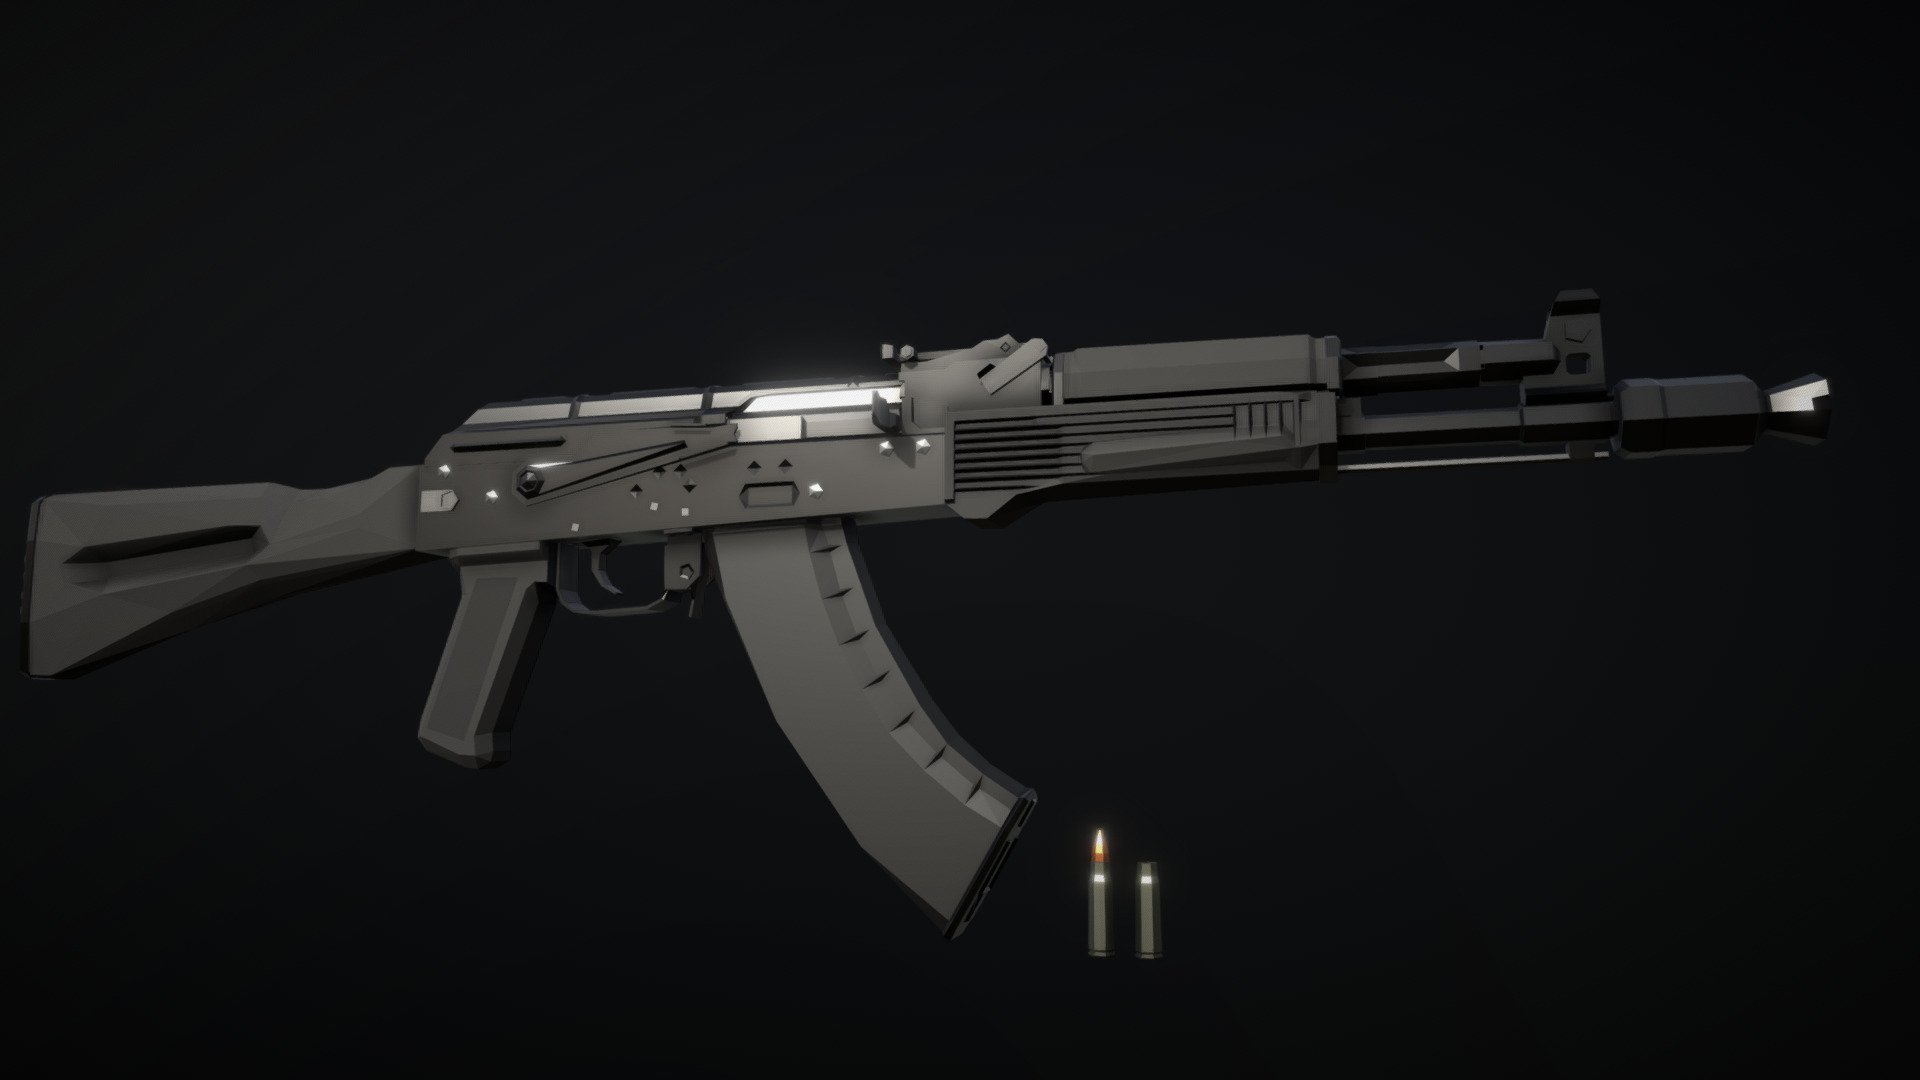 Low-Poly model of the AK-104, the carbine variant of the AK-103, both part of 100-series of AK rifles. Its barrel is shortened to right in front of the gas block, which itself has been combined with the front sight block. the weapon has a AKS-74U style flash hider/muzzle boost, identical to that of the AK-105 except for a larger hole and a &ldquo;7.62